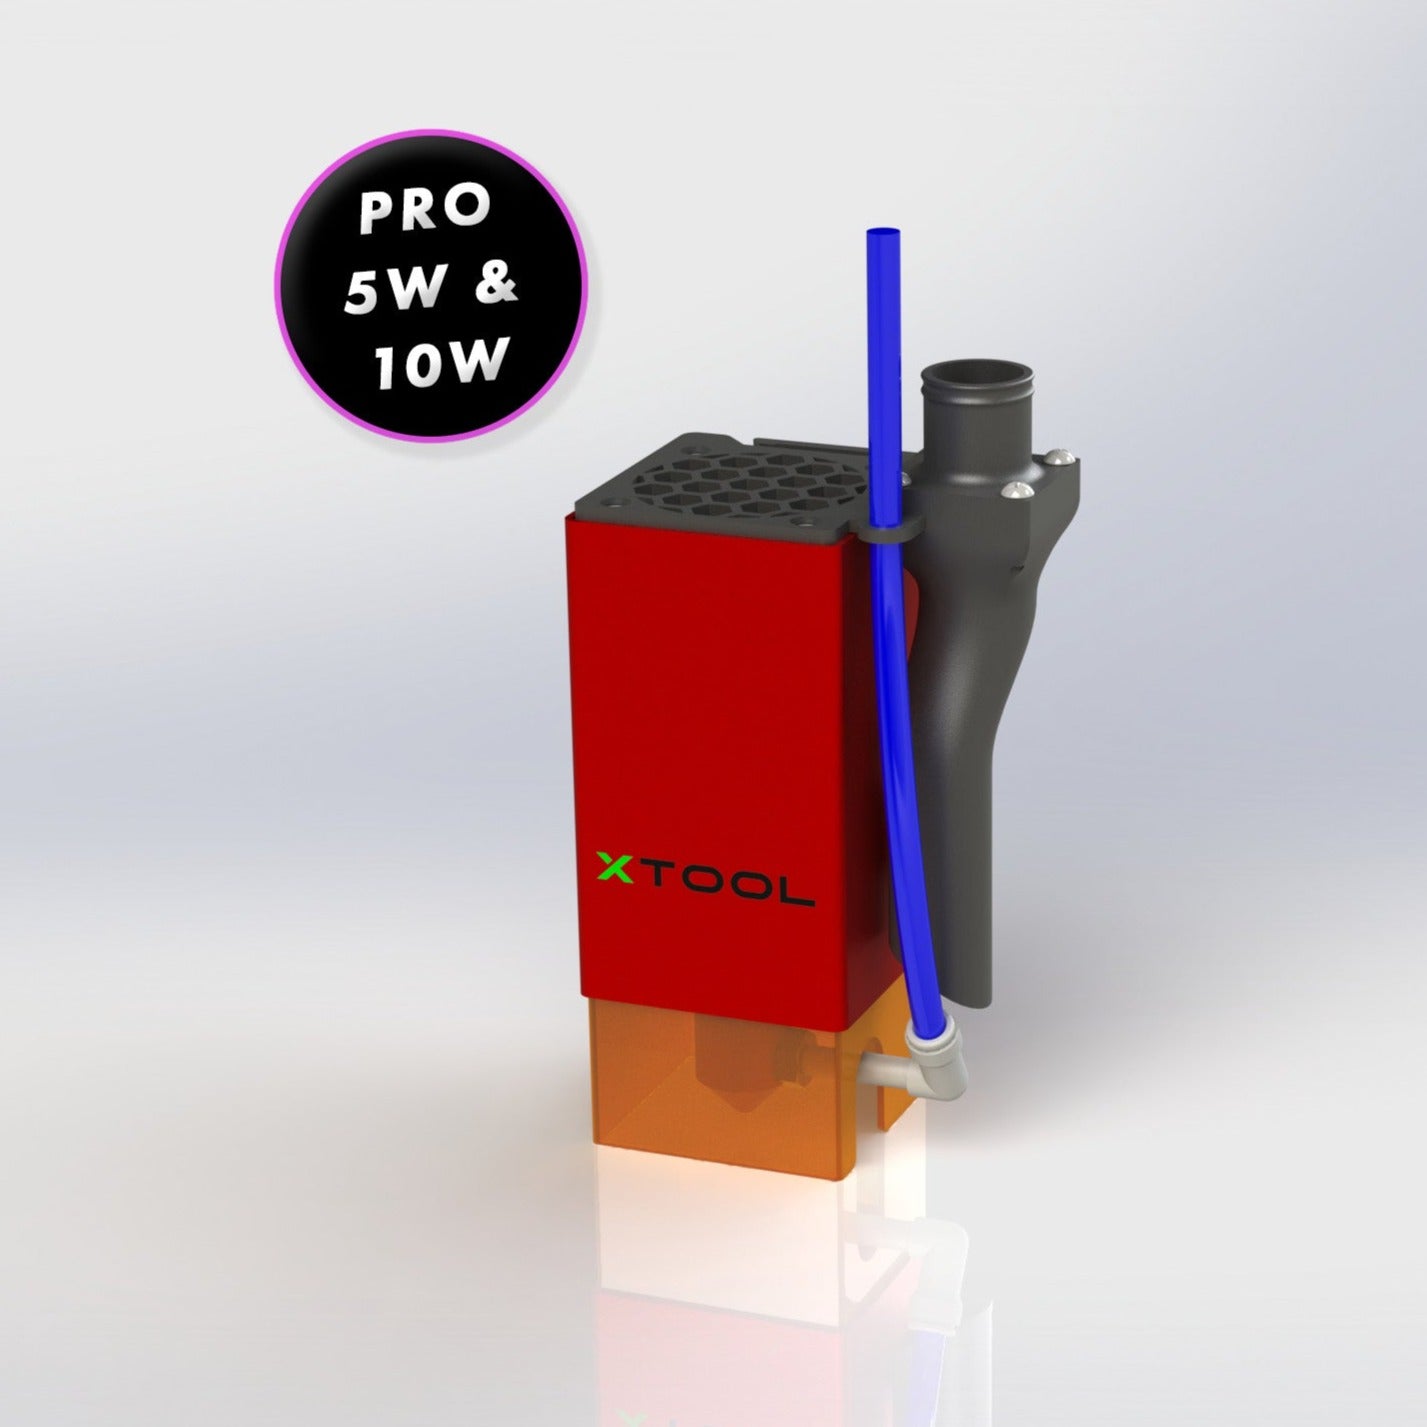 XTool D1 Pro (5W / 10W) Fume Extraction Nozzle